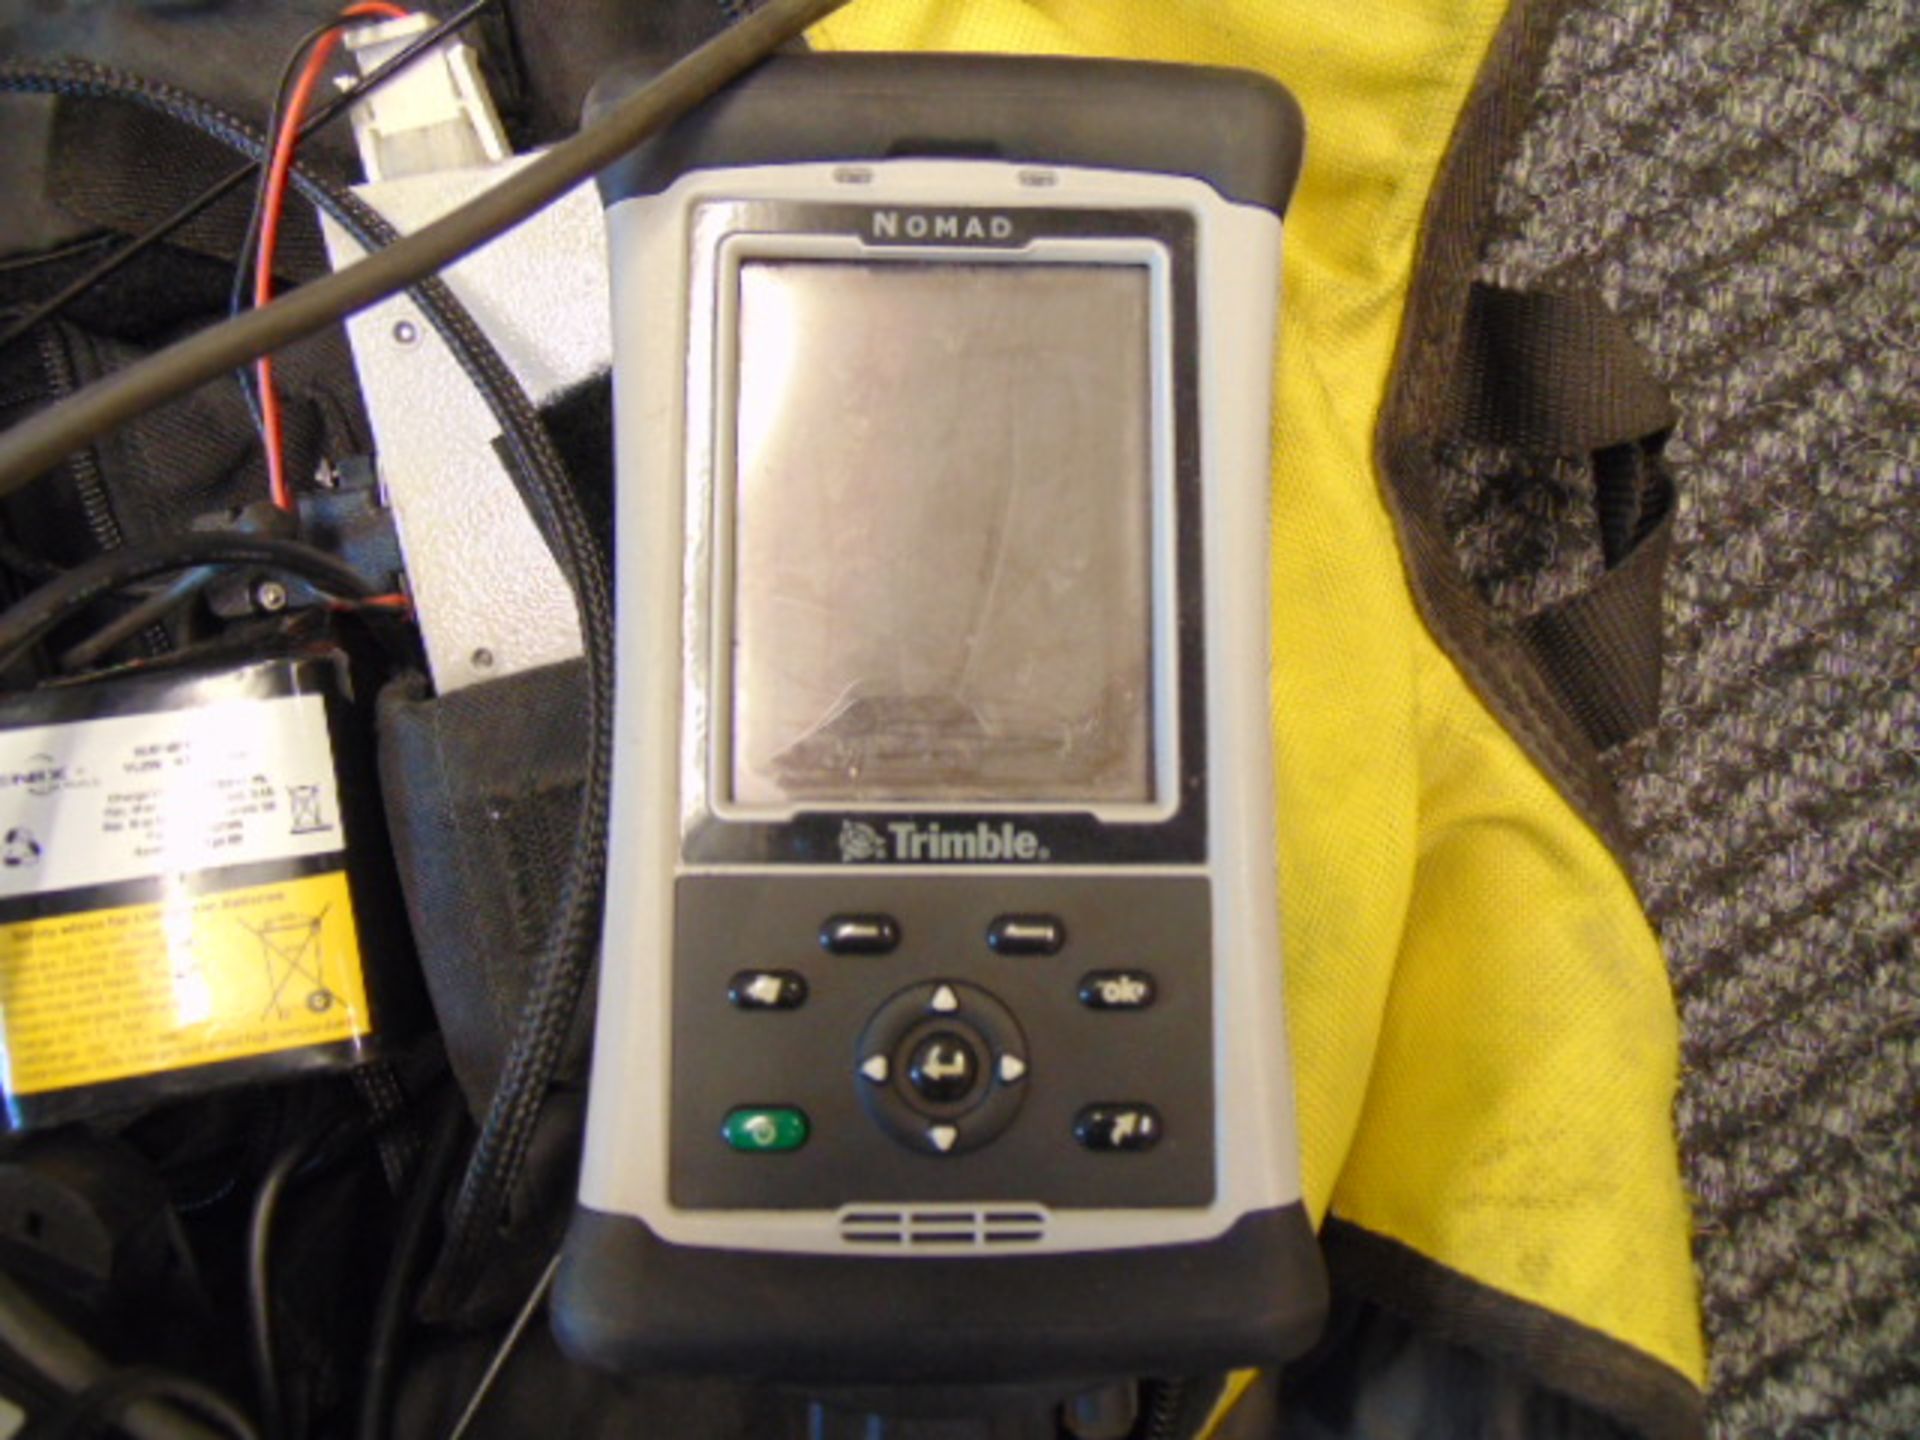 Trimble Nomad Rugged Handheld Computer c/w Accessories as shown - Image 2 of 12